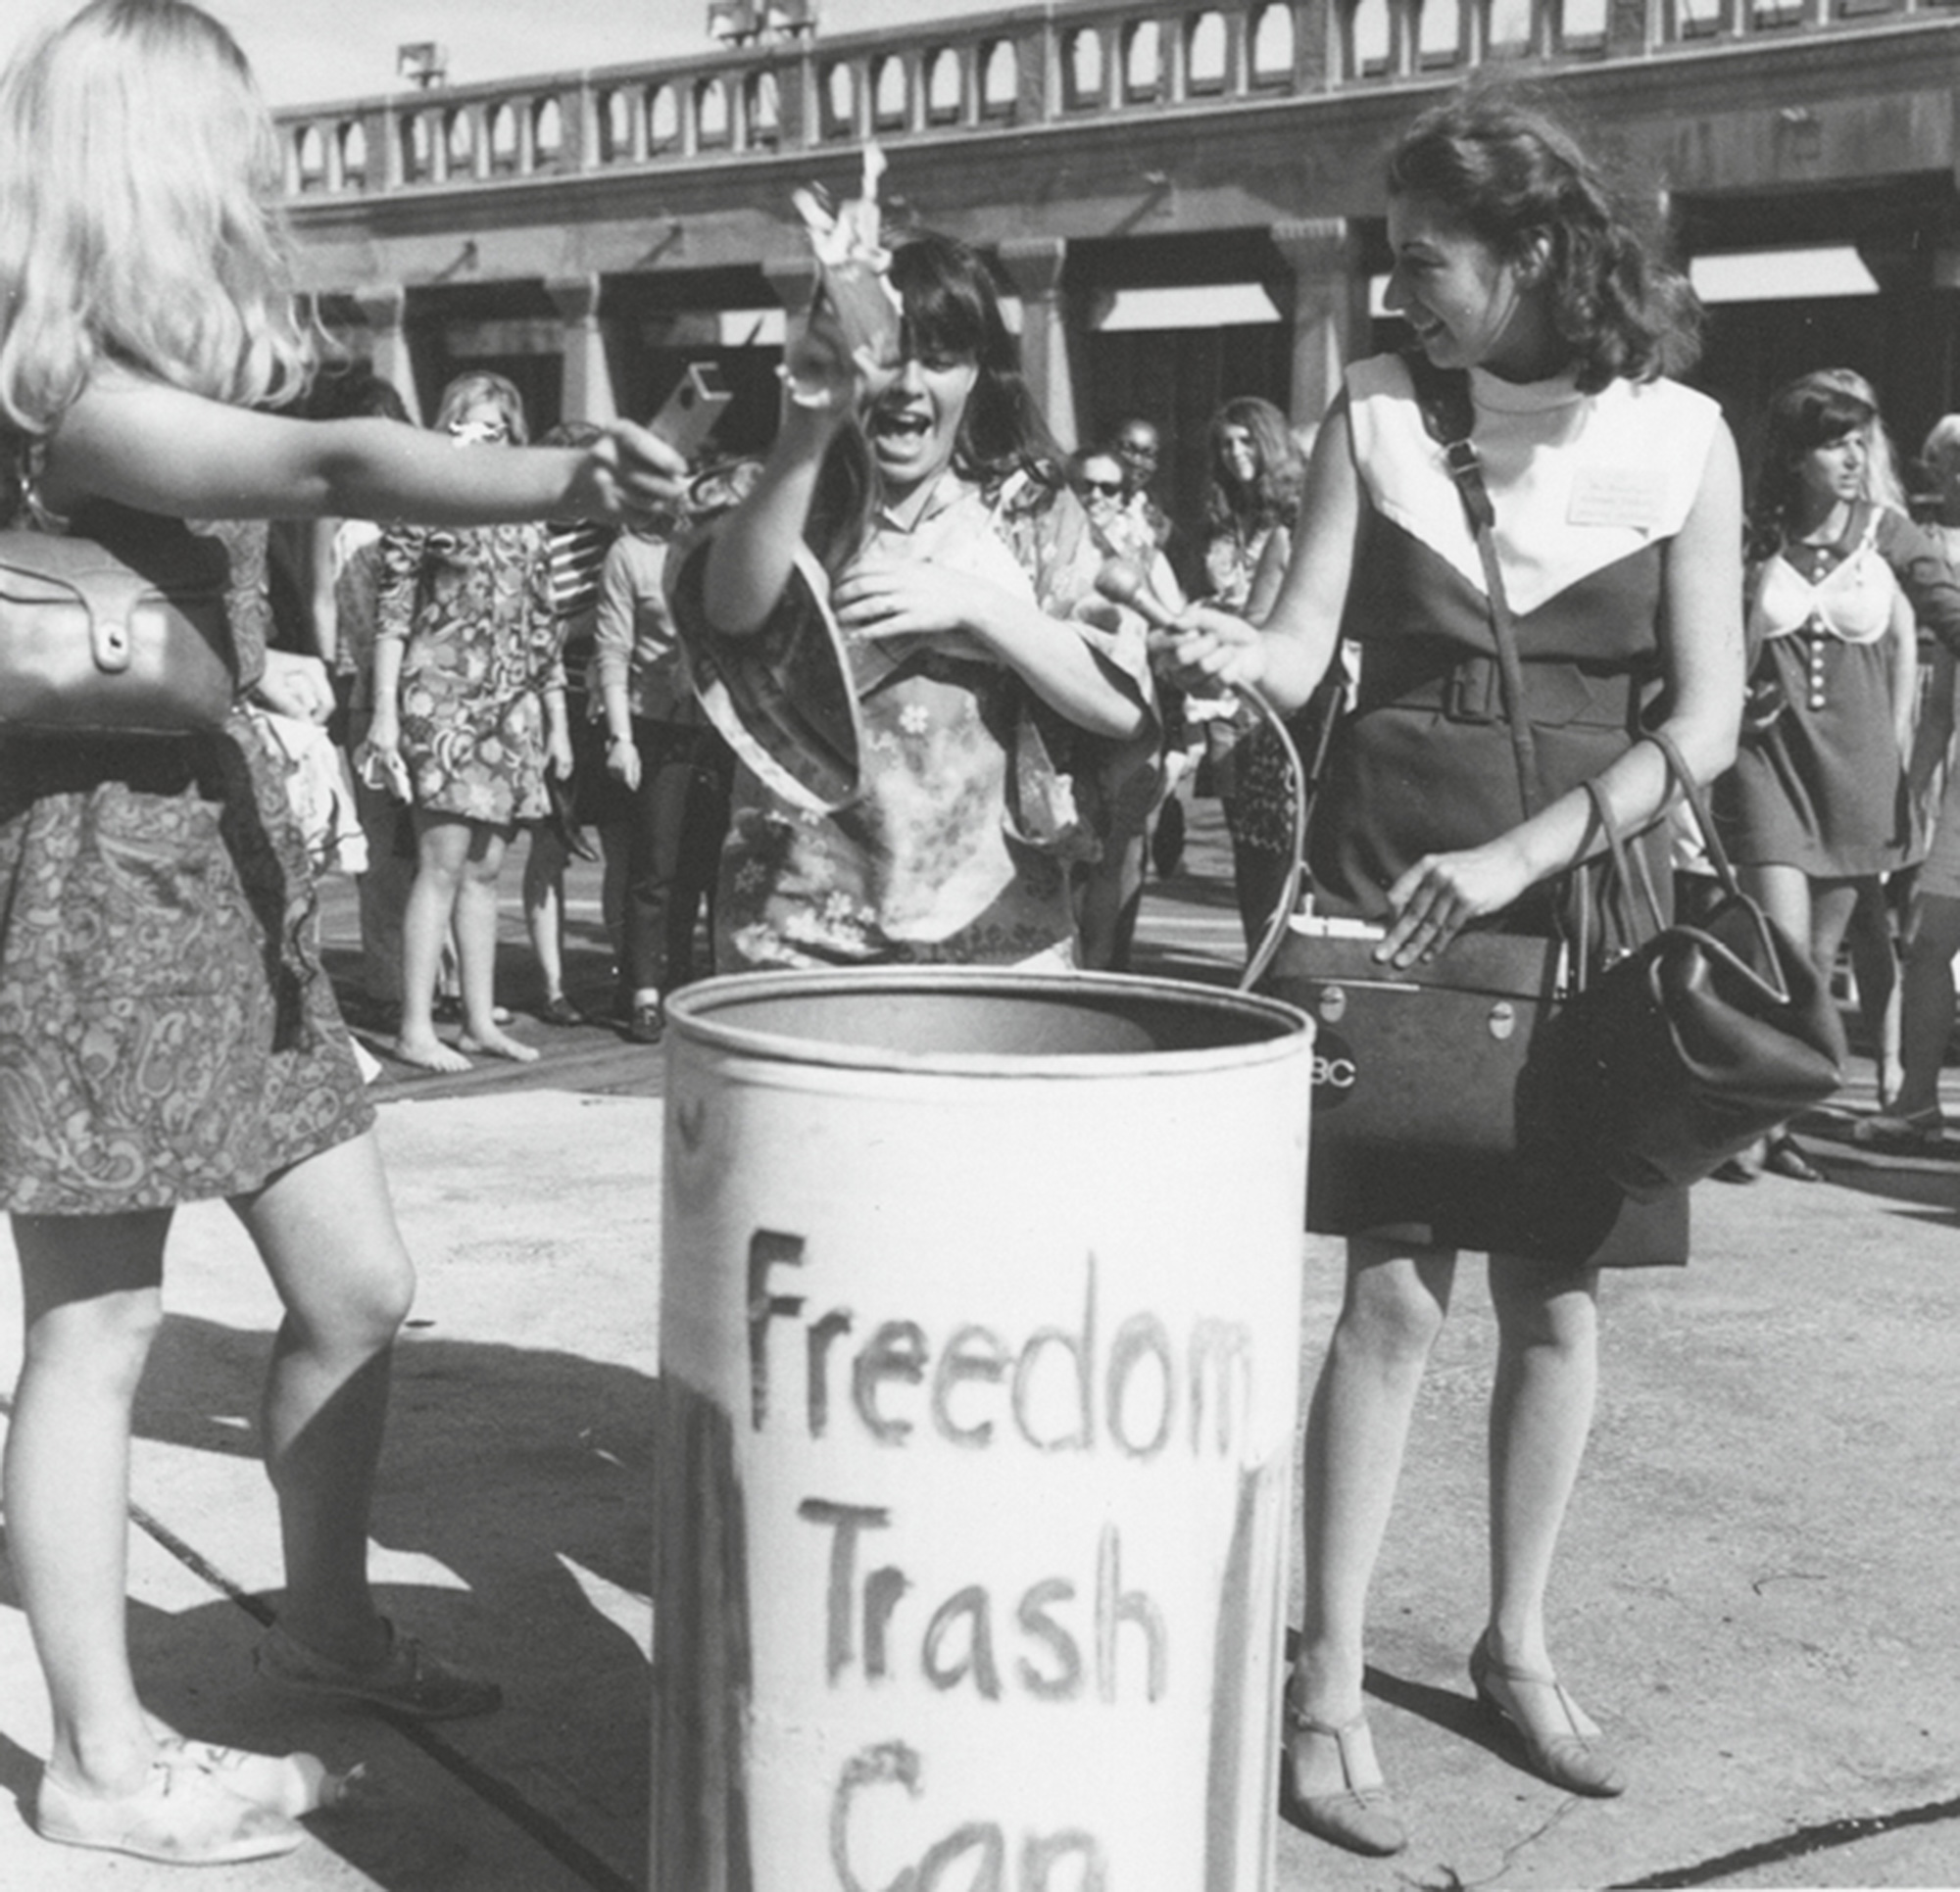 A photograph of “Freedom Trash Can” being used outside the Miss America Pageant.